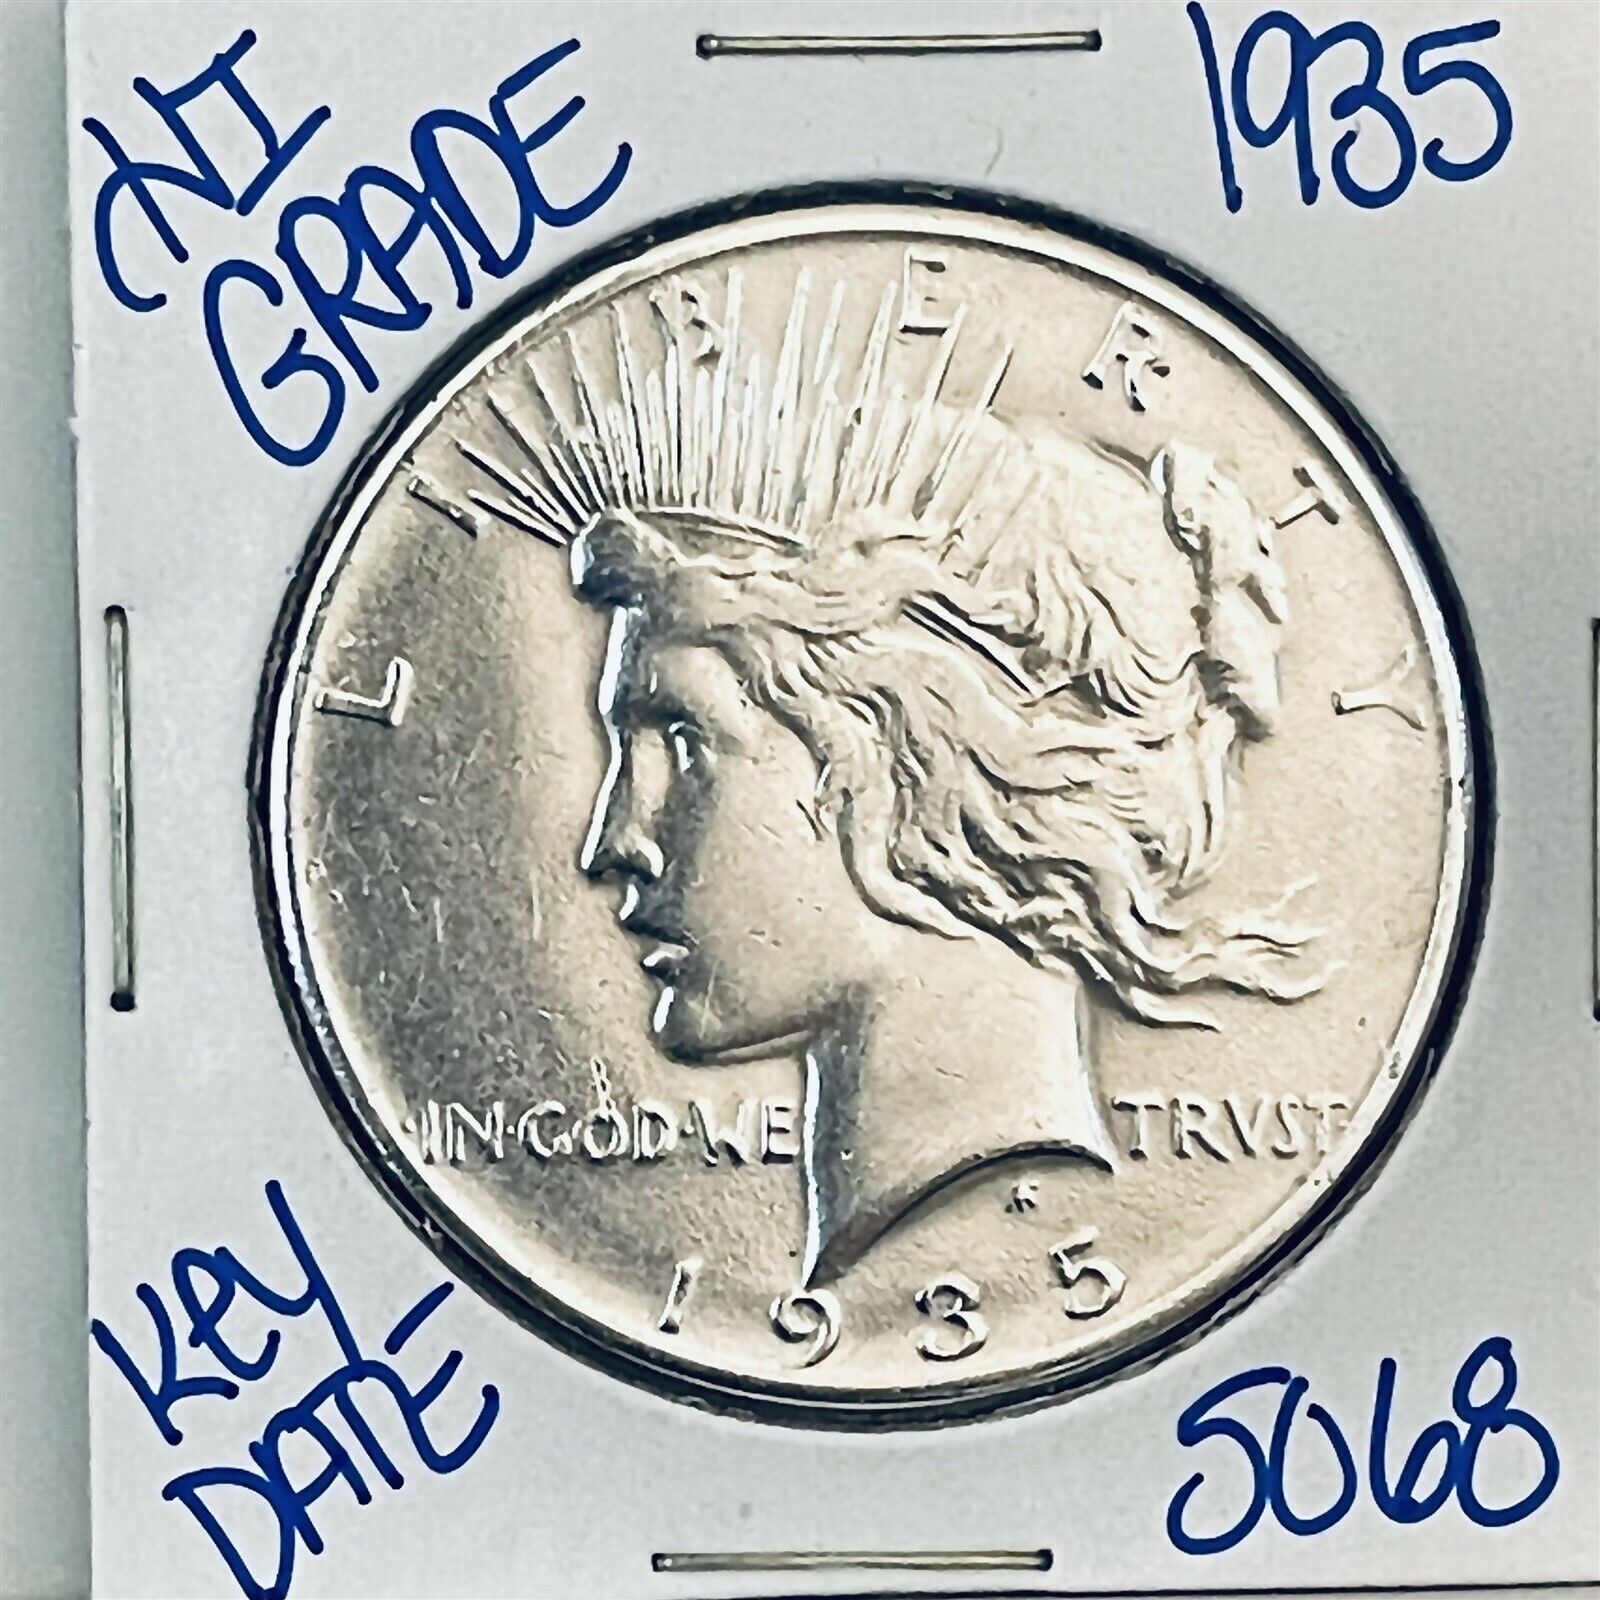 1935 SILVER PEACE DOLLAR Max free 57% OFF COIN #5068 FREE KEY DATE RARE SHIPPING